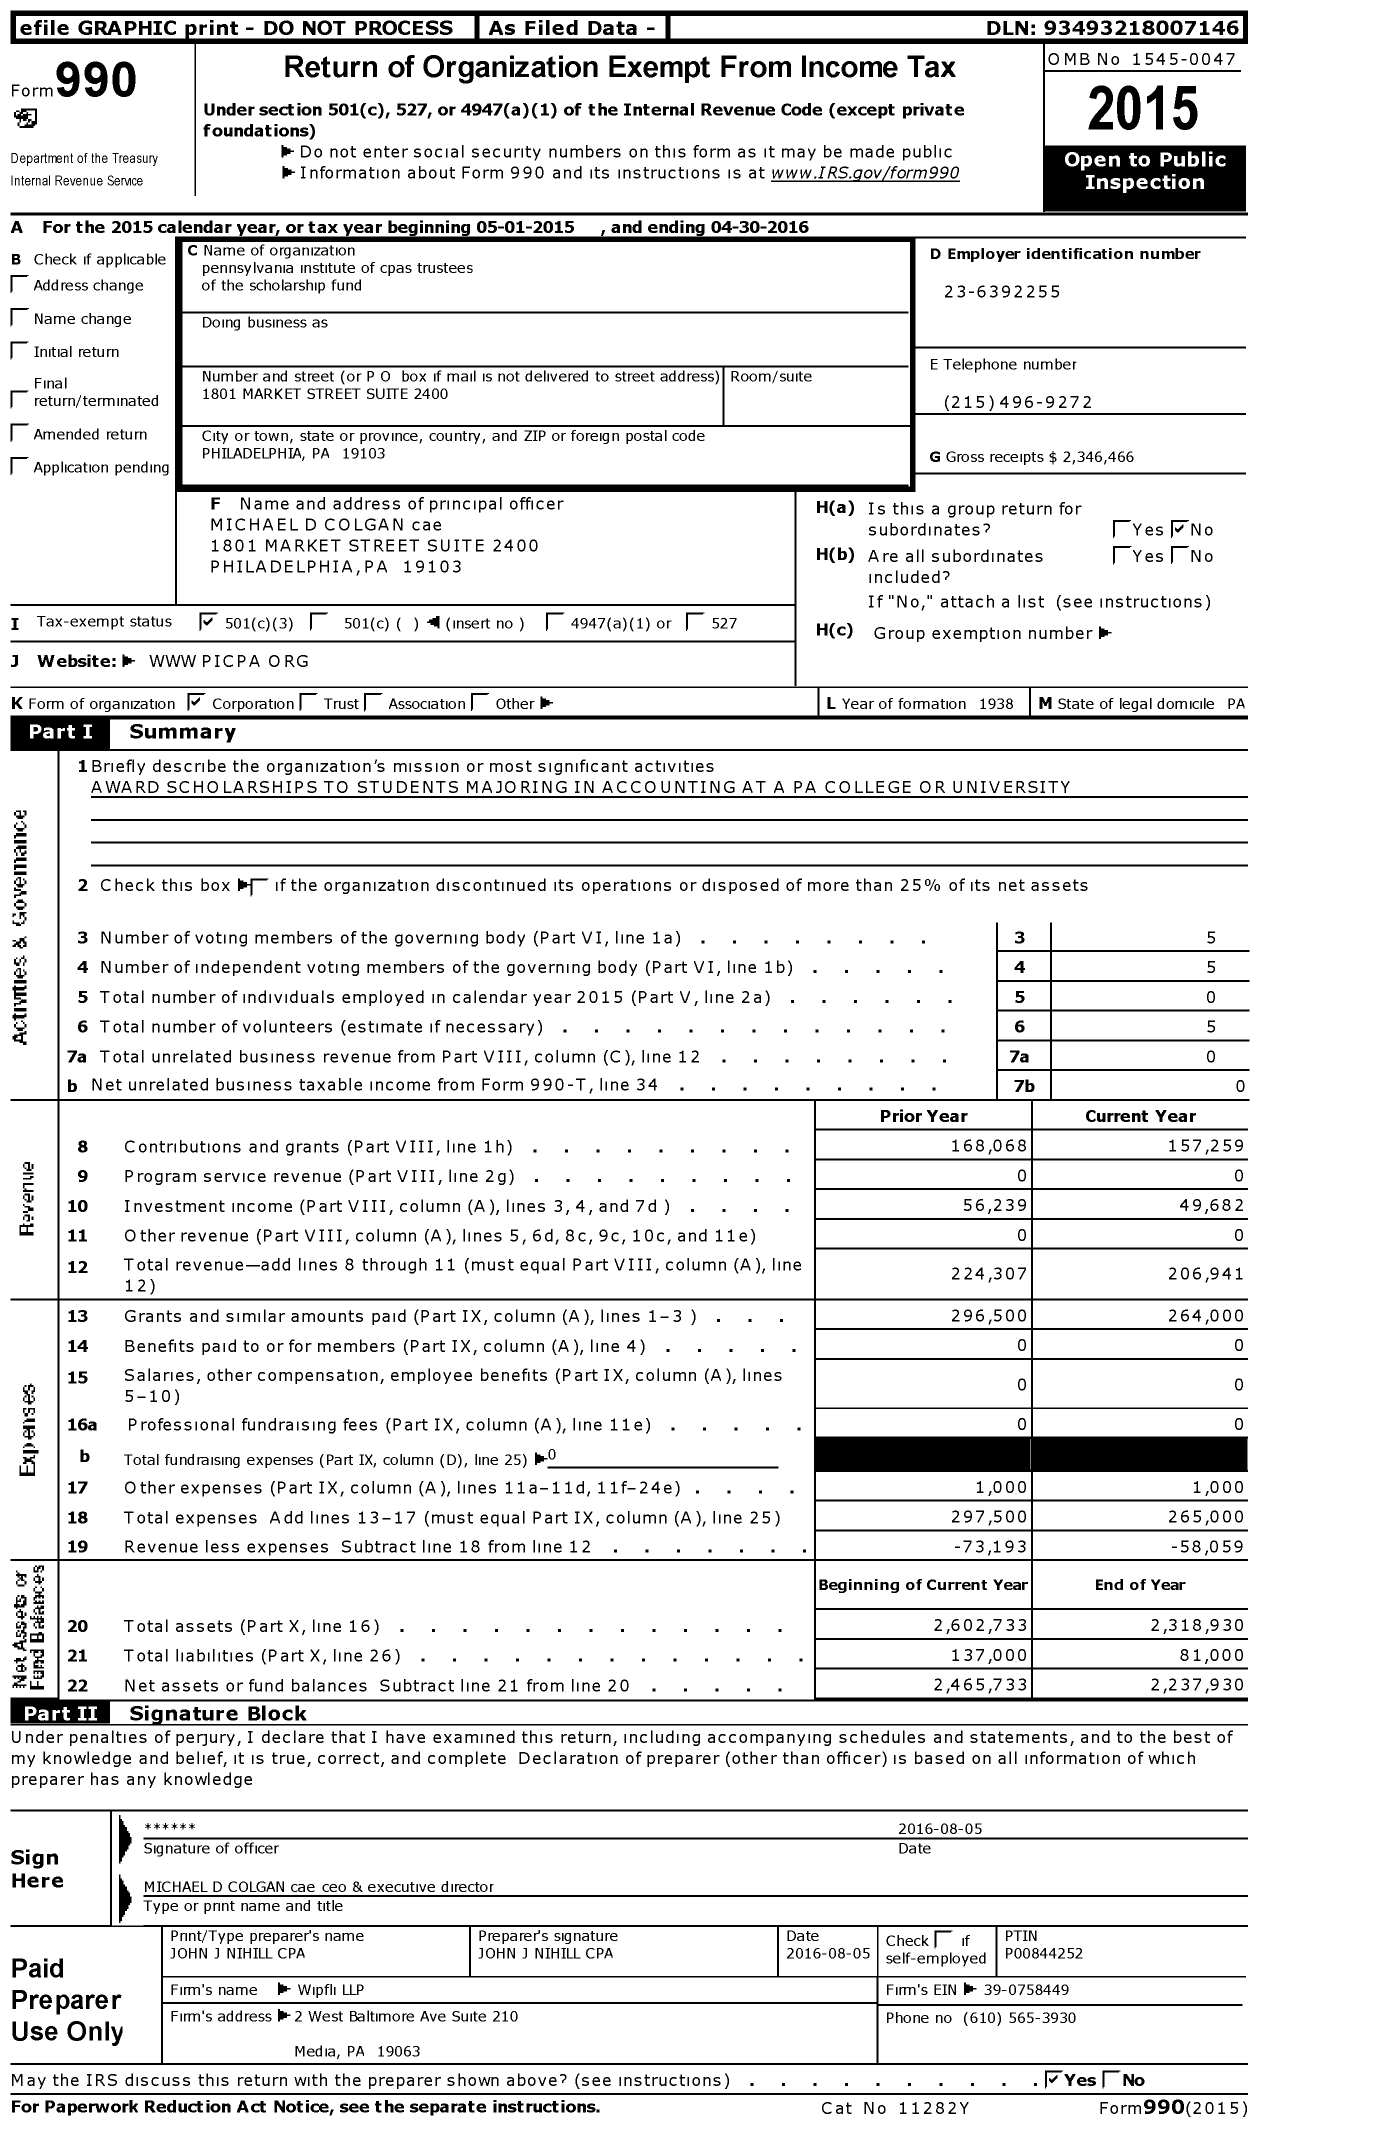 Image of first page of 2015 Form 990 for pennsylvania institute of cpas trustees of the scholarship fund